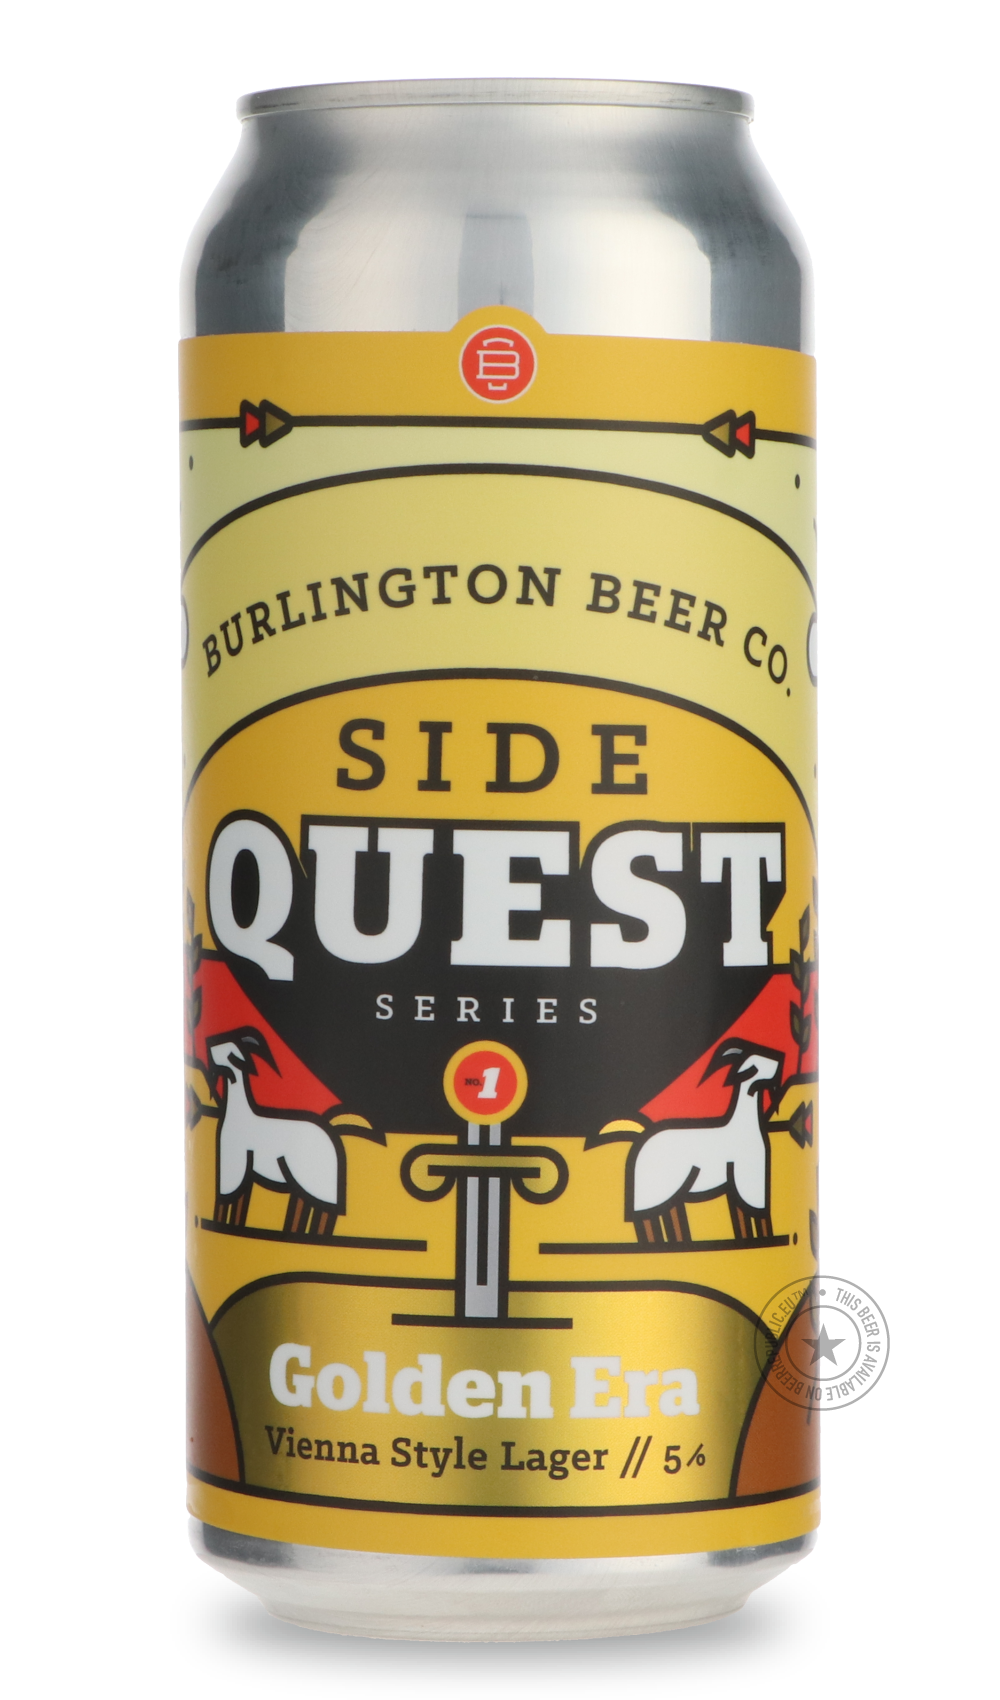 -Burlington- Side Quest I-Pale- Only @ Beer Republic - The best online beer store for American & Canadian craft beer - Buy beer online from the USA and Canada - Bier online kopen - Amerikaans bier kopen - Craft beer store - Craft beer kopen - Amerikanisch bier kaufen - Bier online kaufen - Acheter biere online - IPA - Stout - Porter - New England IPA - Hazy IPA - Imperial Stout - Barrel Aged - Barrel Aged Imperial Stout - Brown - Dark beer - Blond - Blonde - Pilsner - Lager - Wheat - Weizen - Amber - Barley